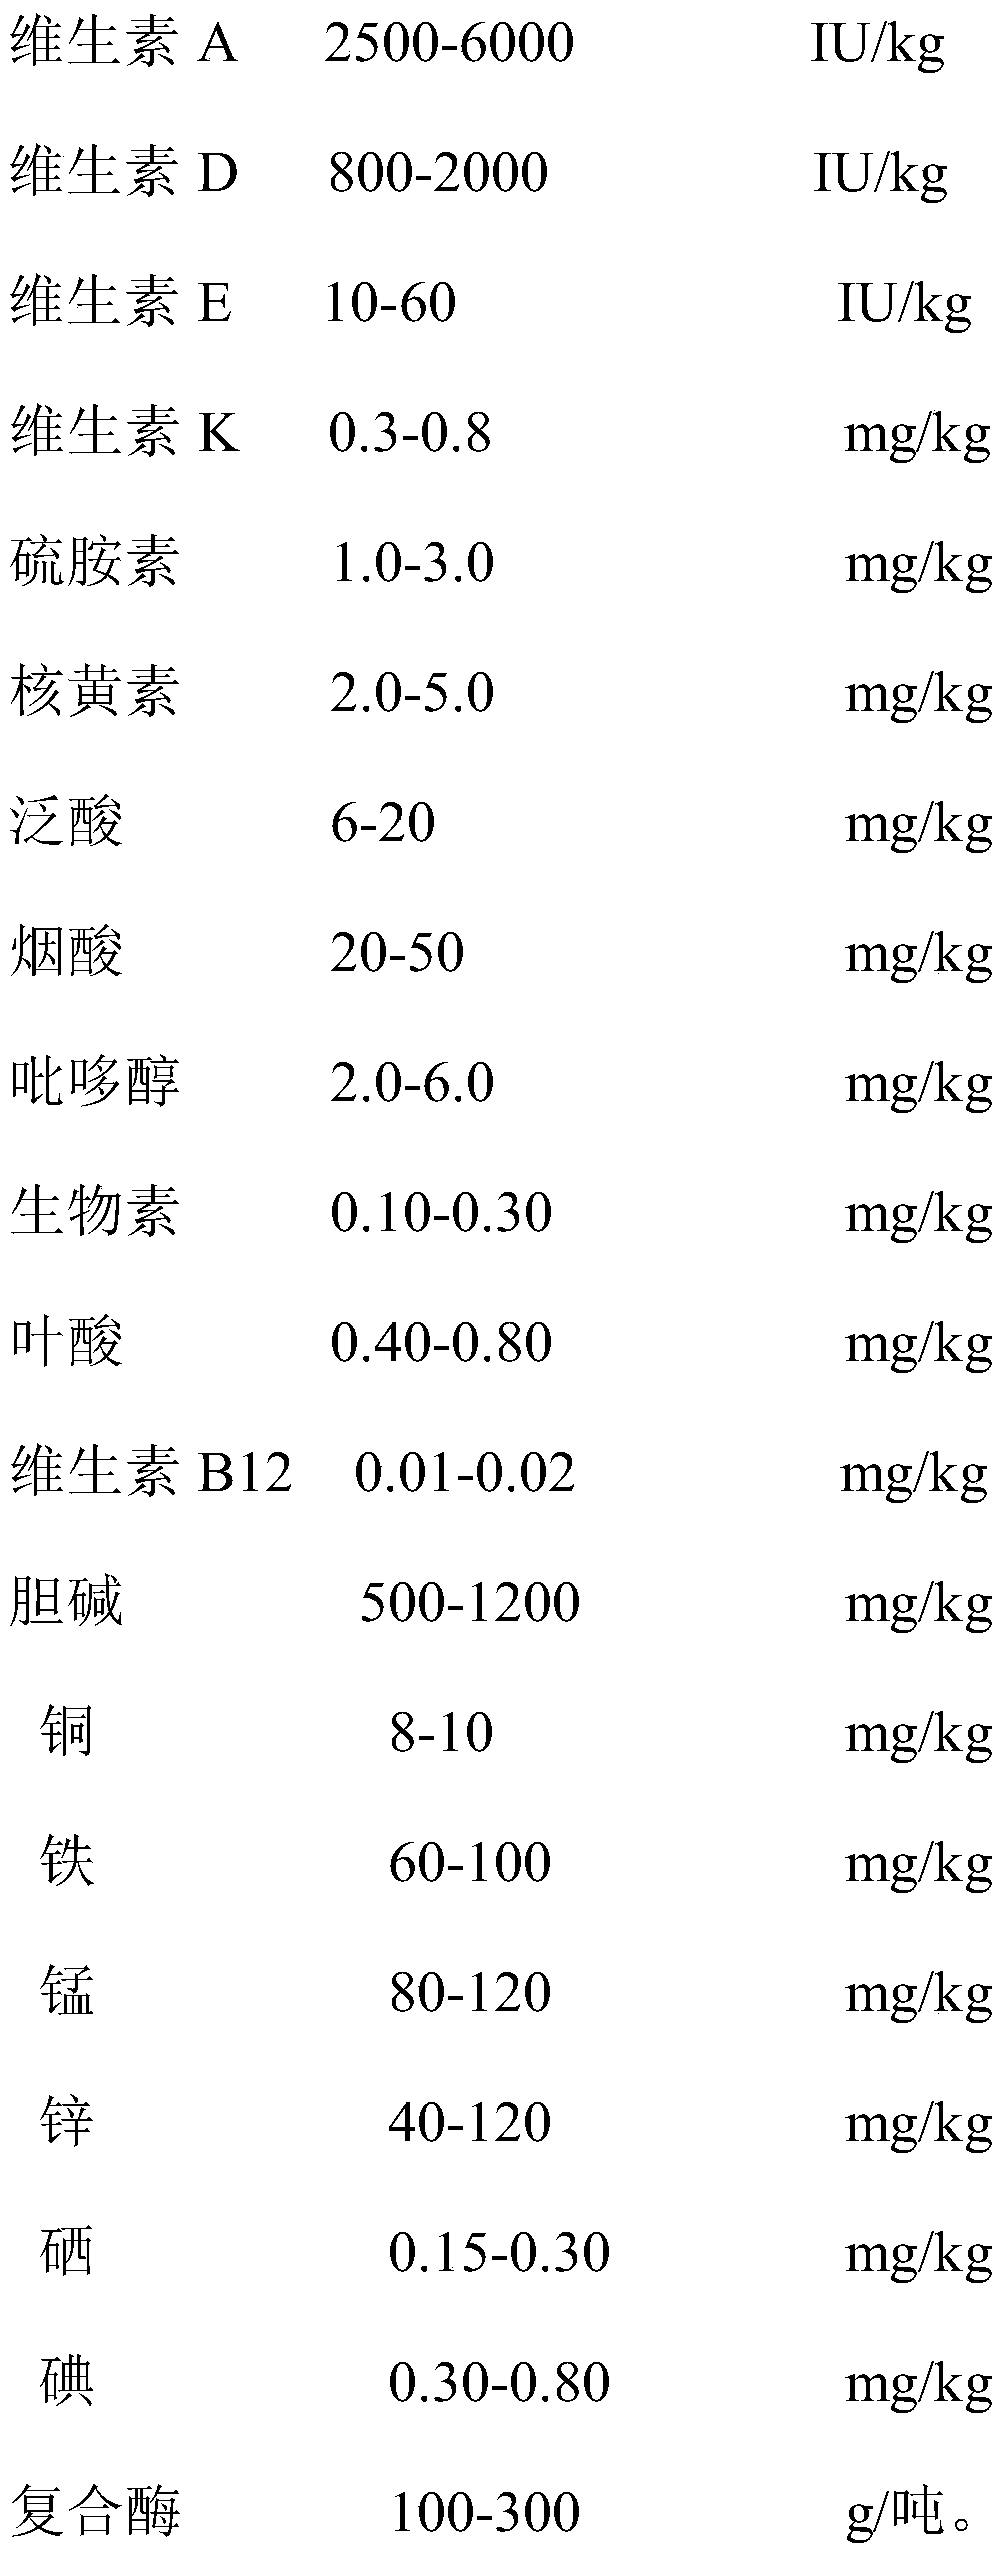 Yellow feather broiler feed containing lysine residue and preparation method of yellow feather broiler feed